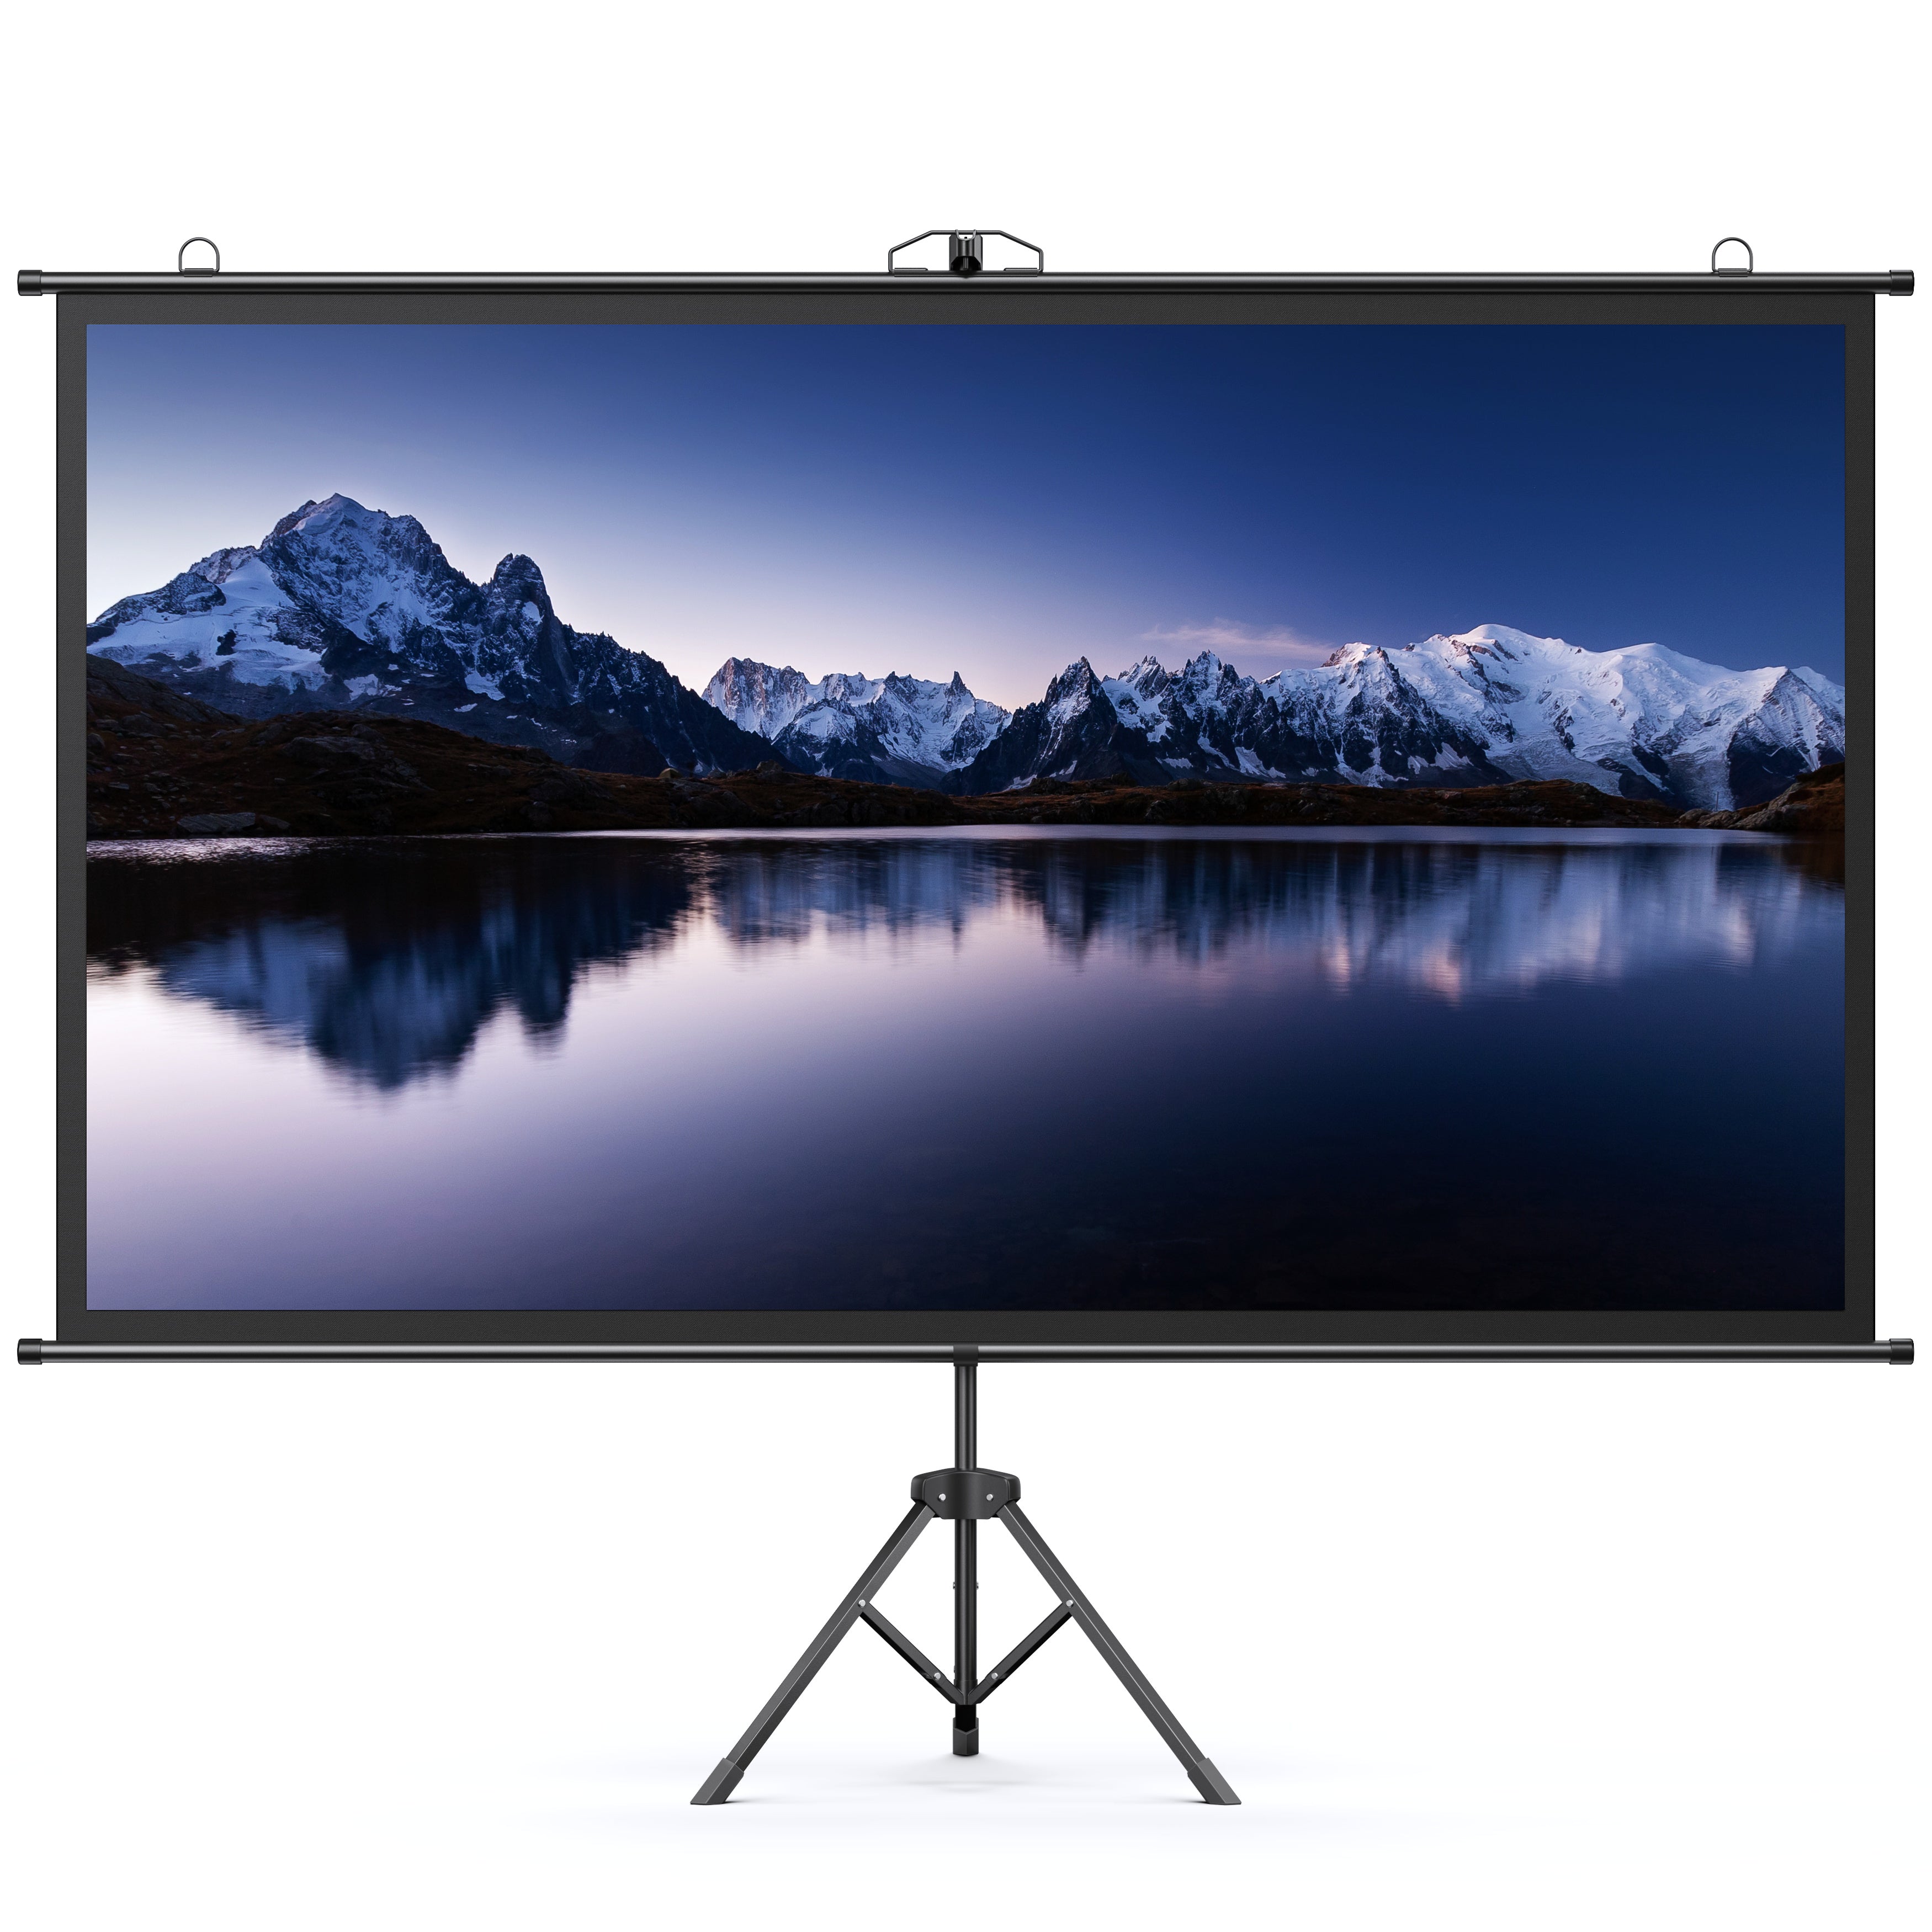 2-in-1 Projector Stand Screen YS-100D - YABER Entertainment Projector